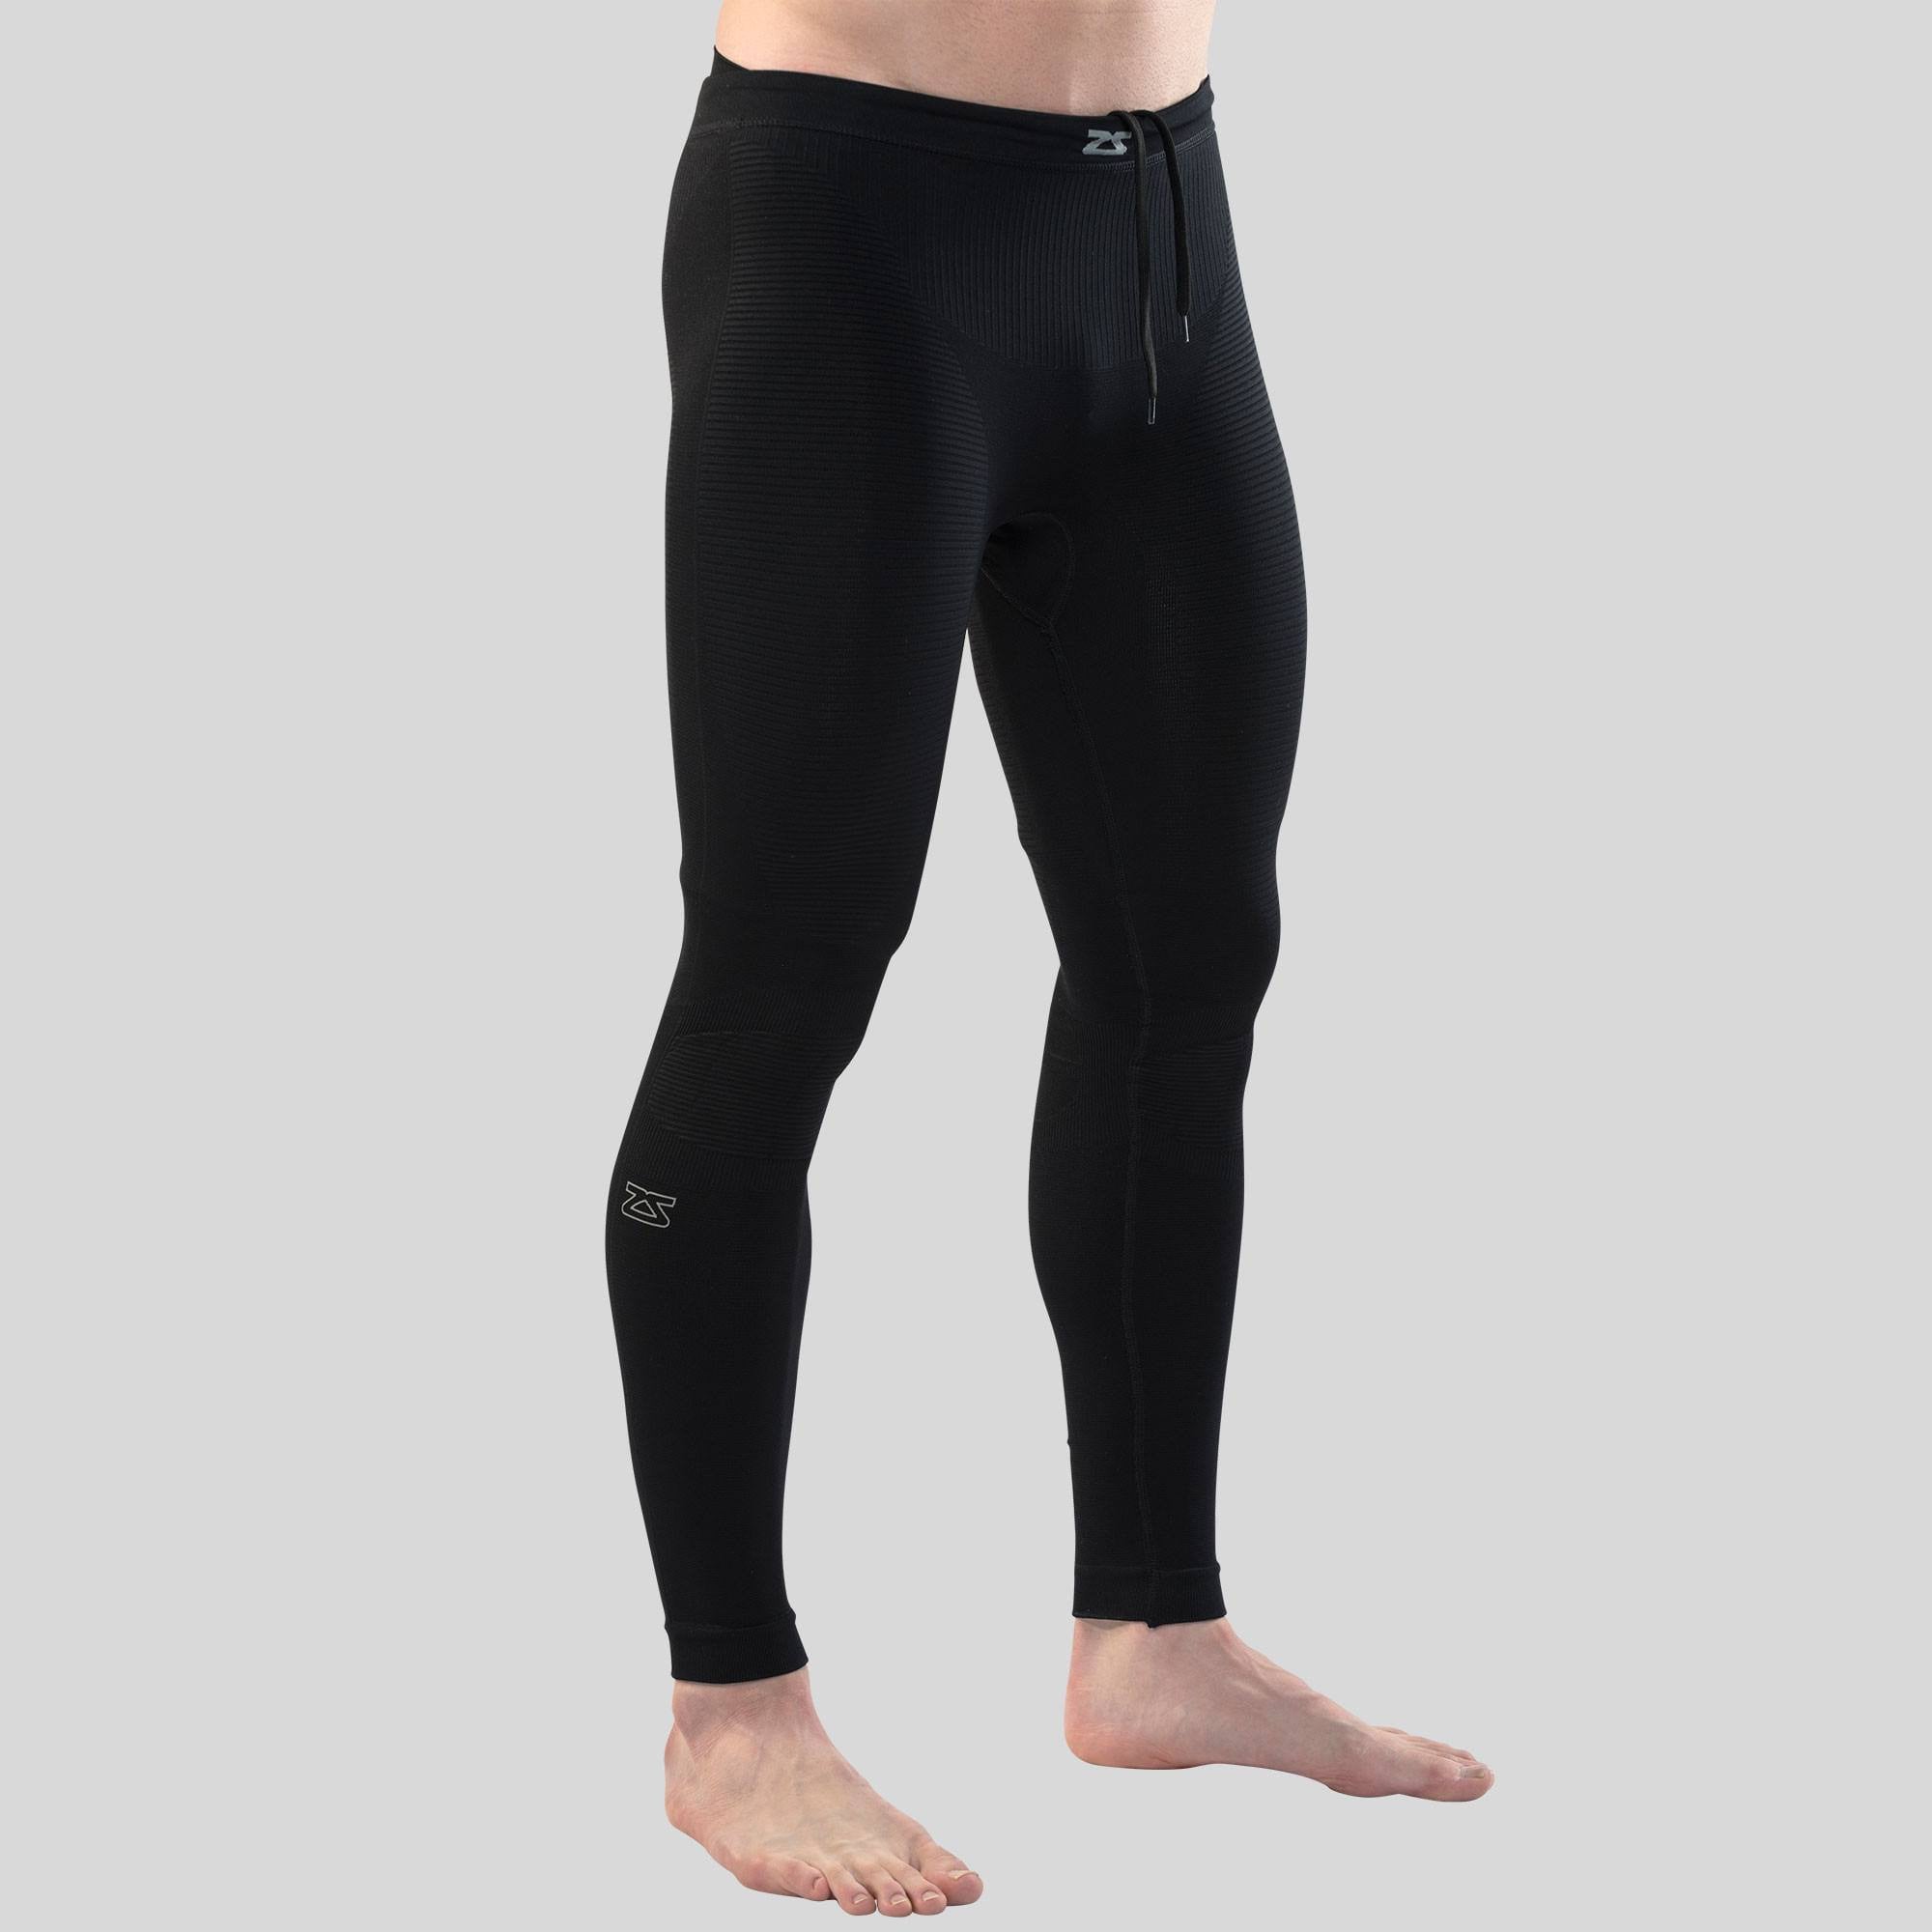 Recovery Tights Leggings, Running Compression Tights for Men | Zensah